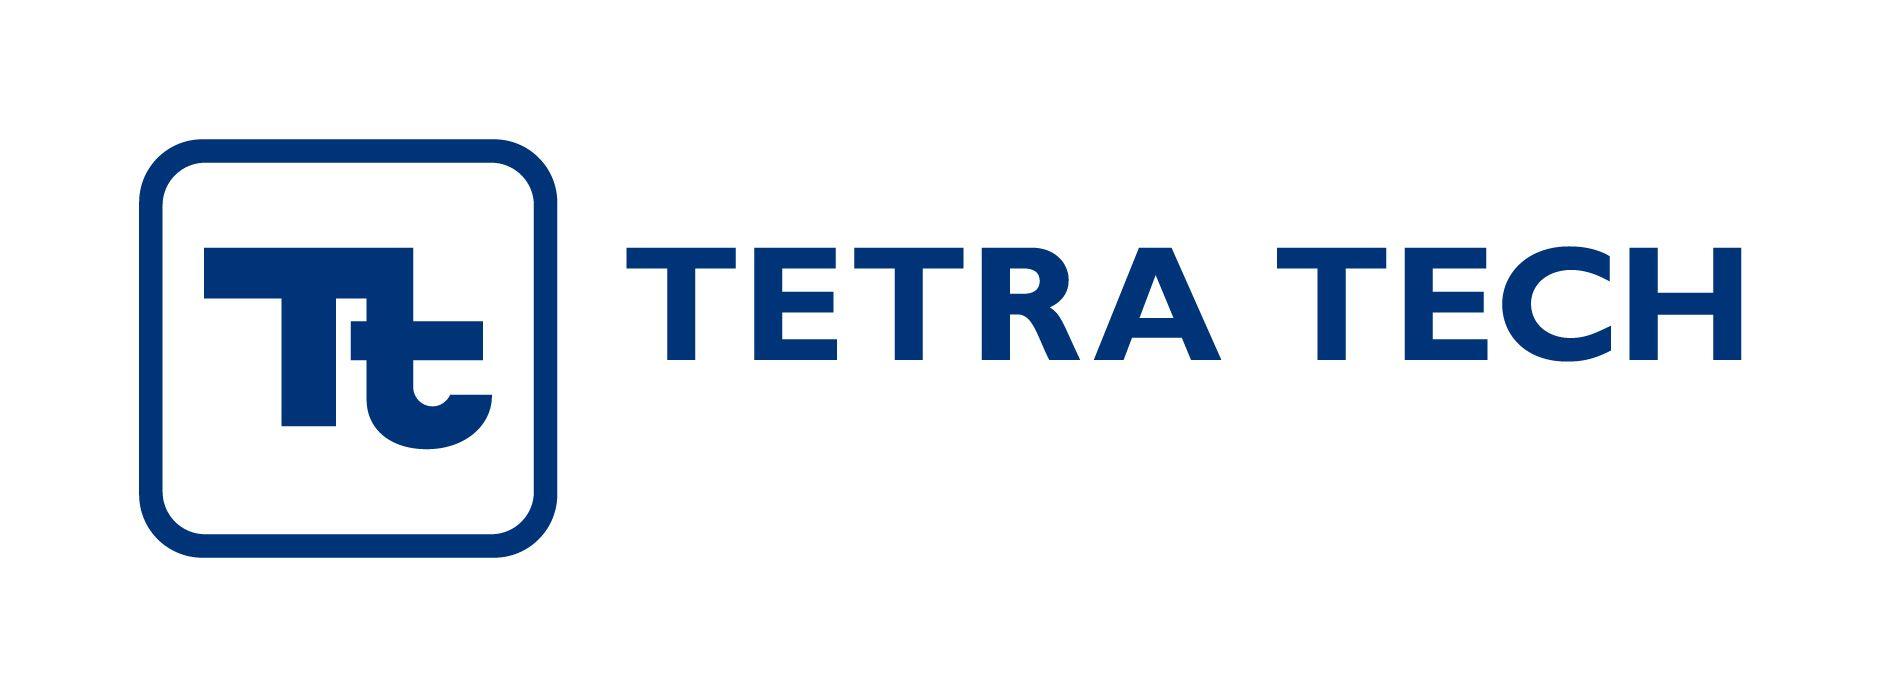 Tetra Logo - Consulting and Engineering Firm